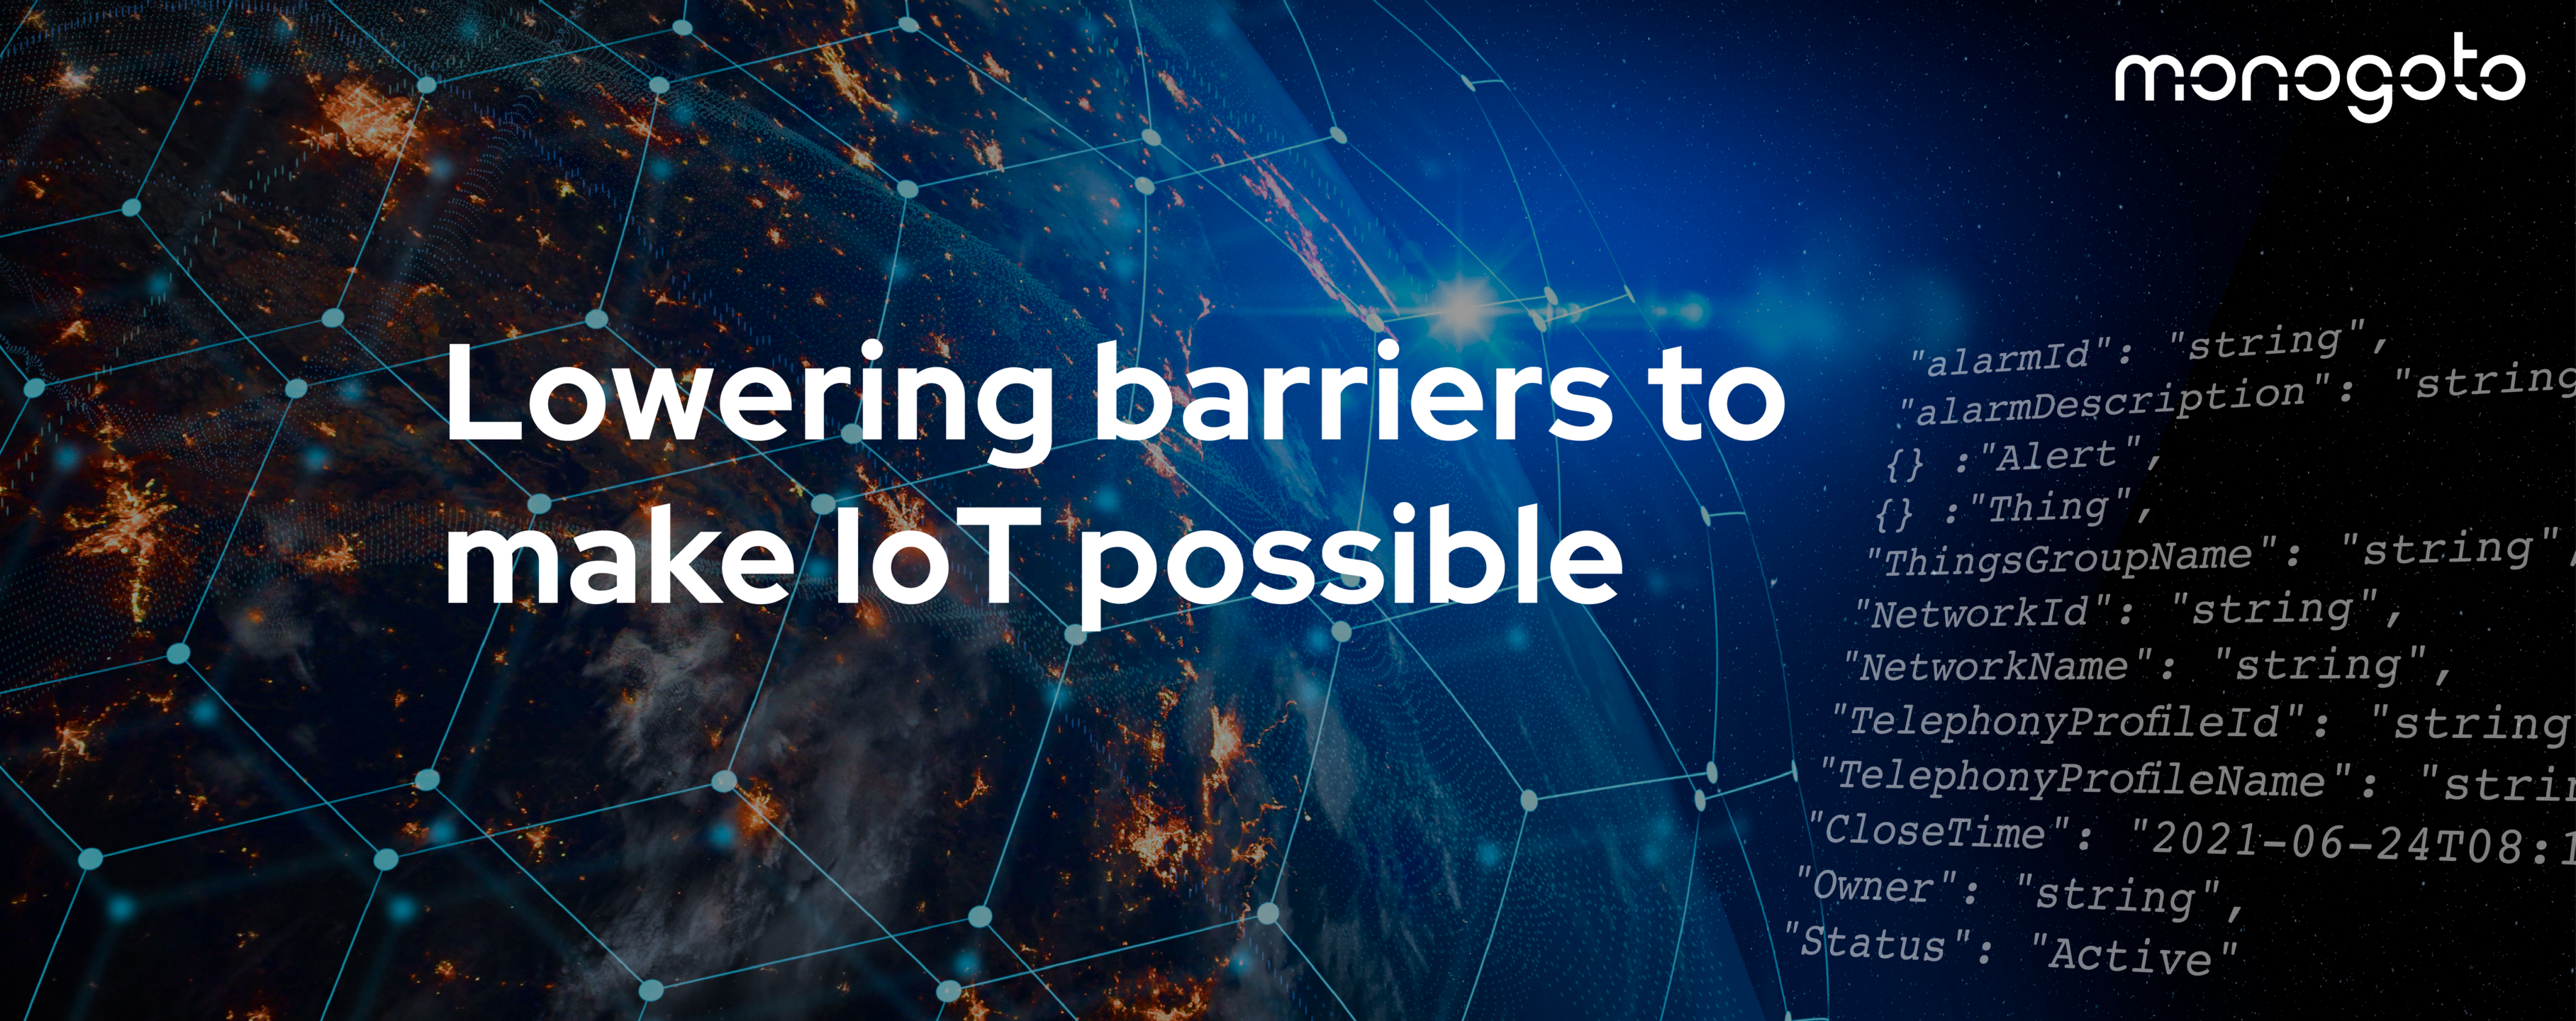 lowering barriers to make iot possible